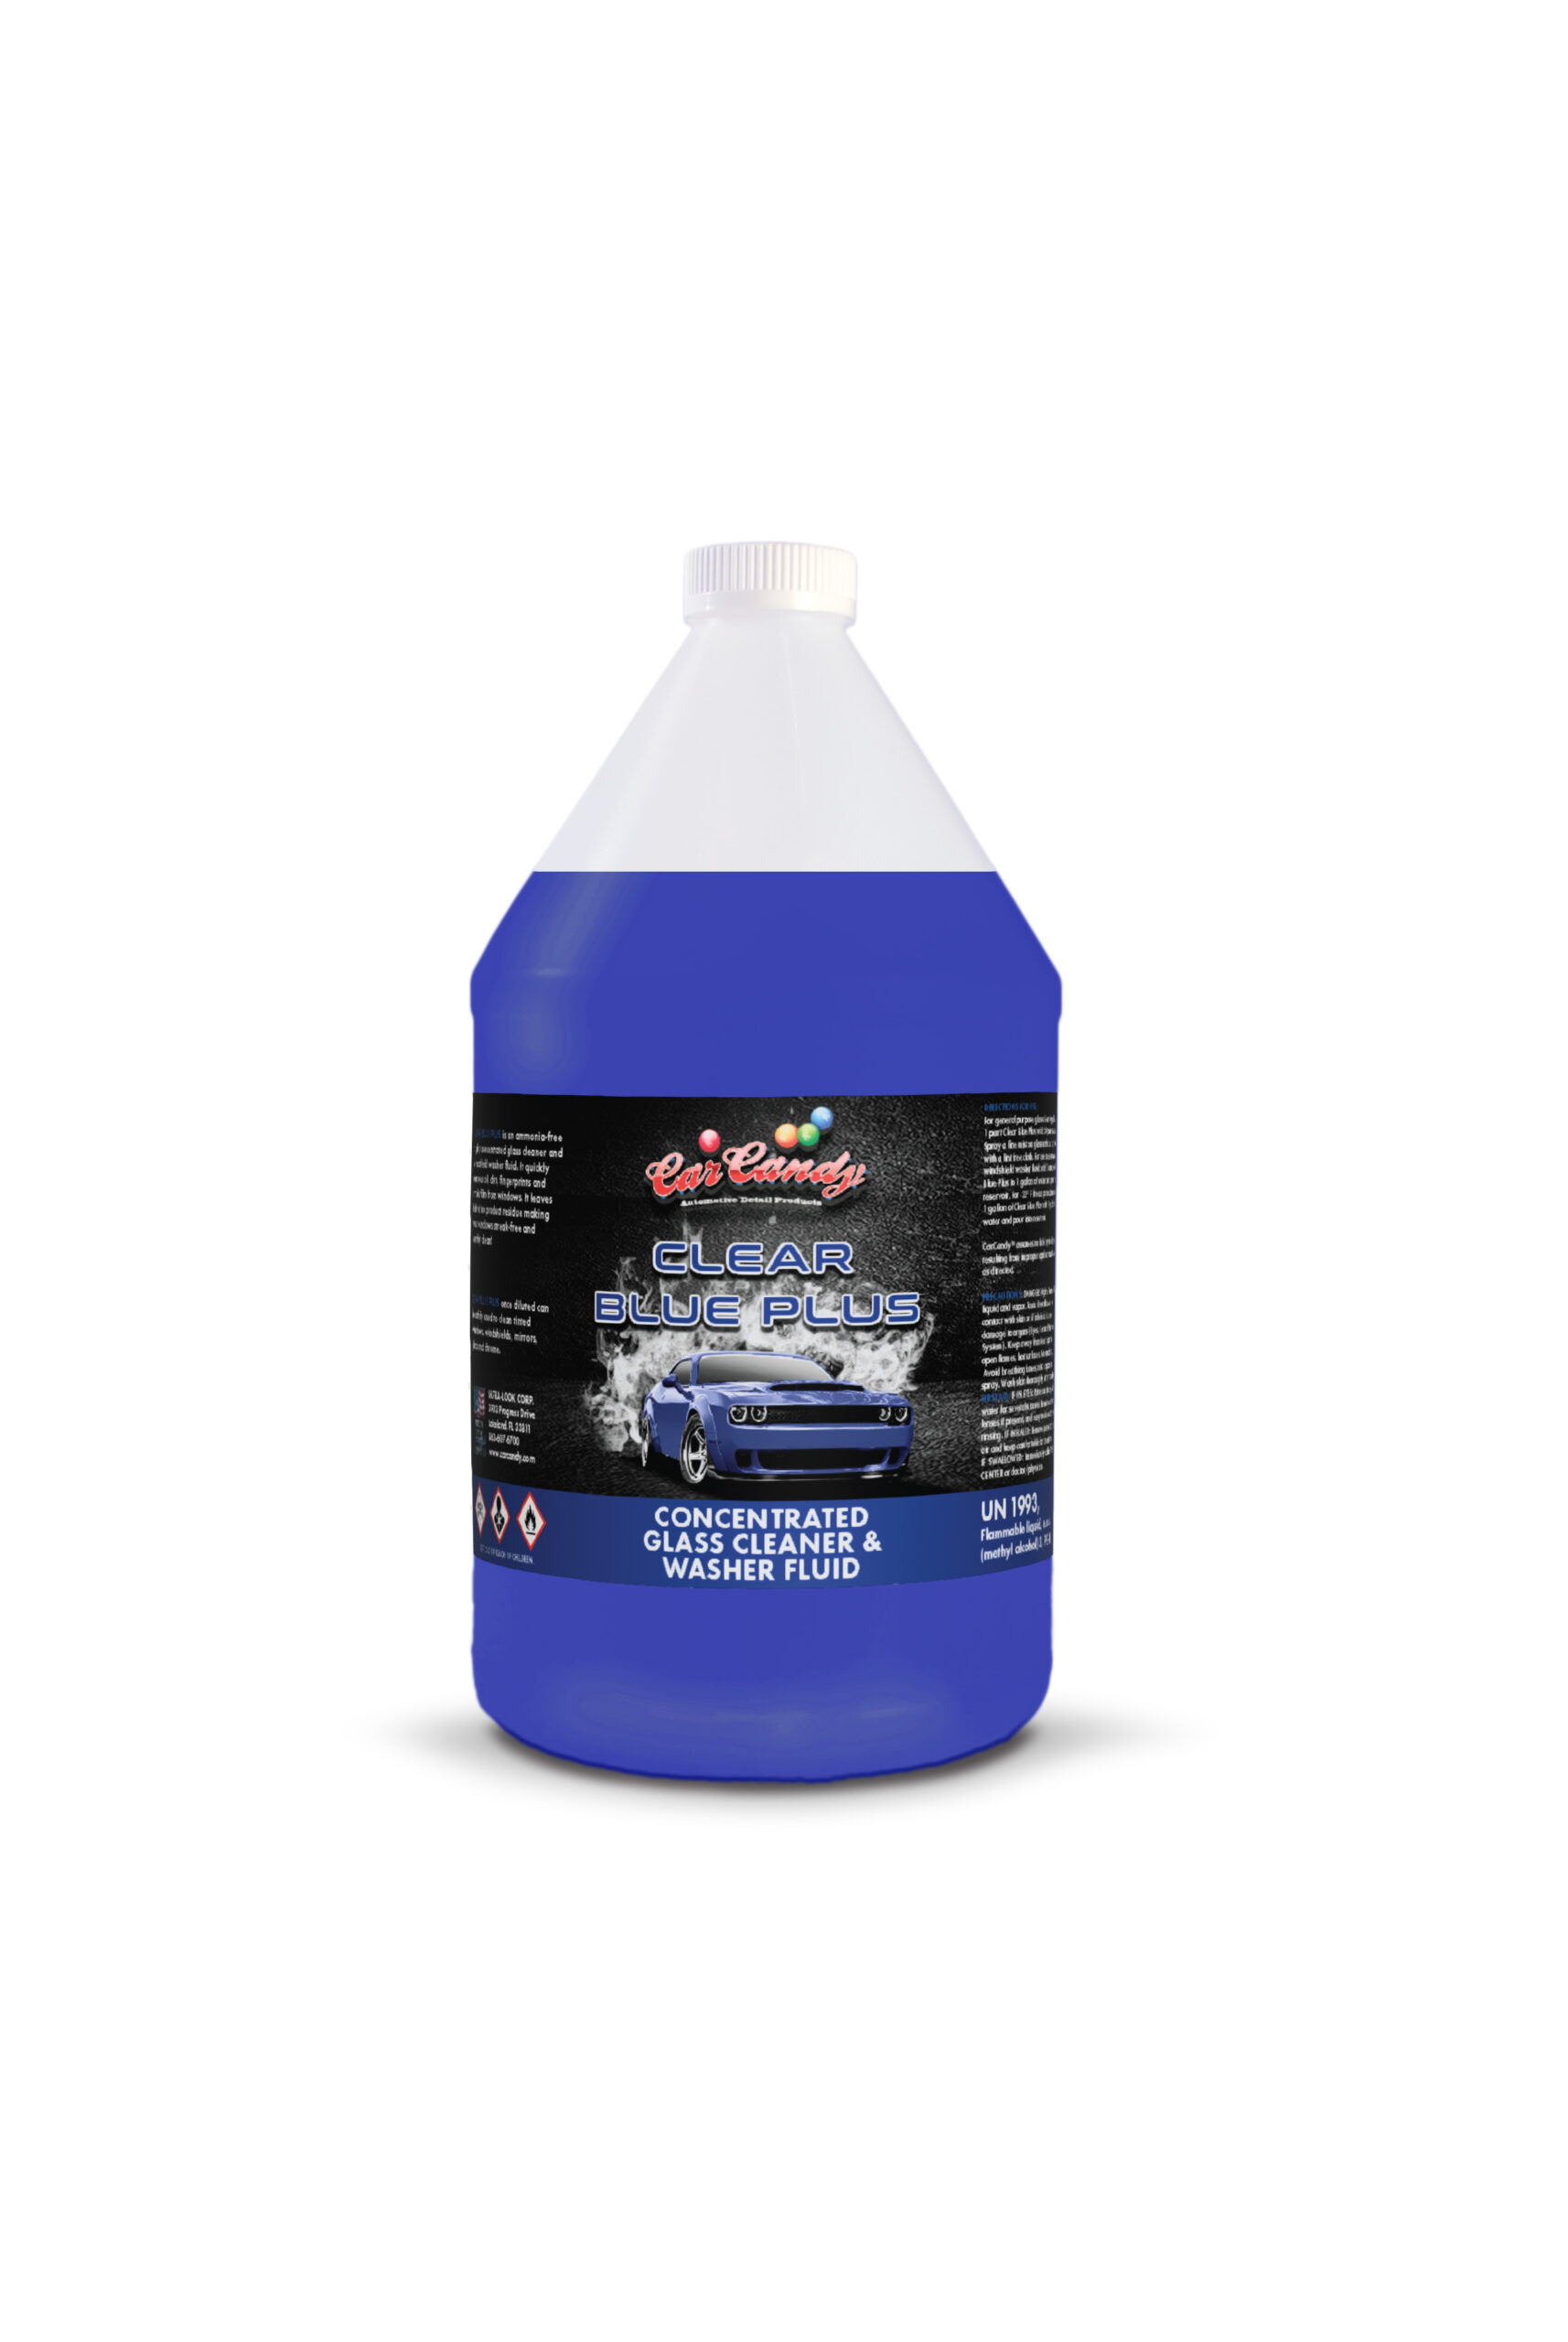 Car Candy - Clear Blue Plus Concentrated Glass Cleaner & Washer Fluid